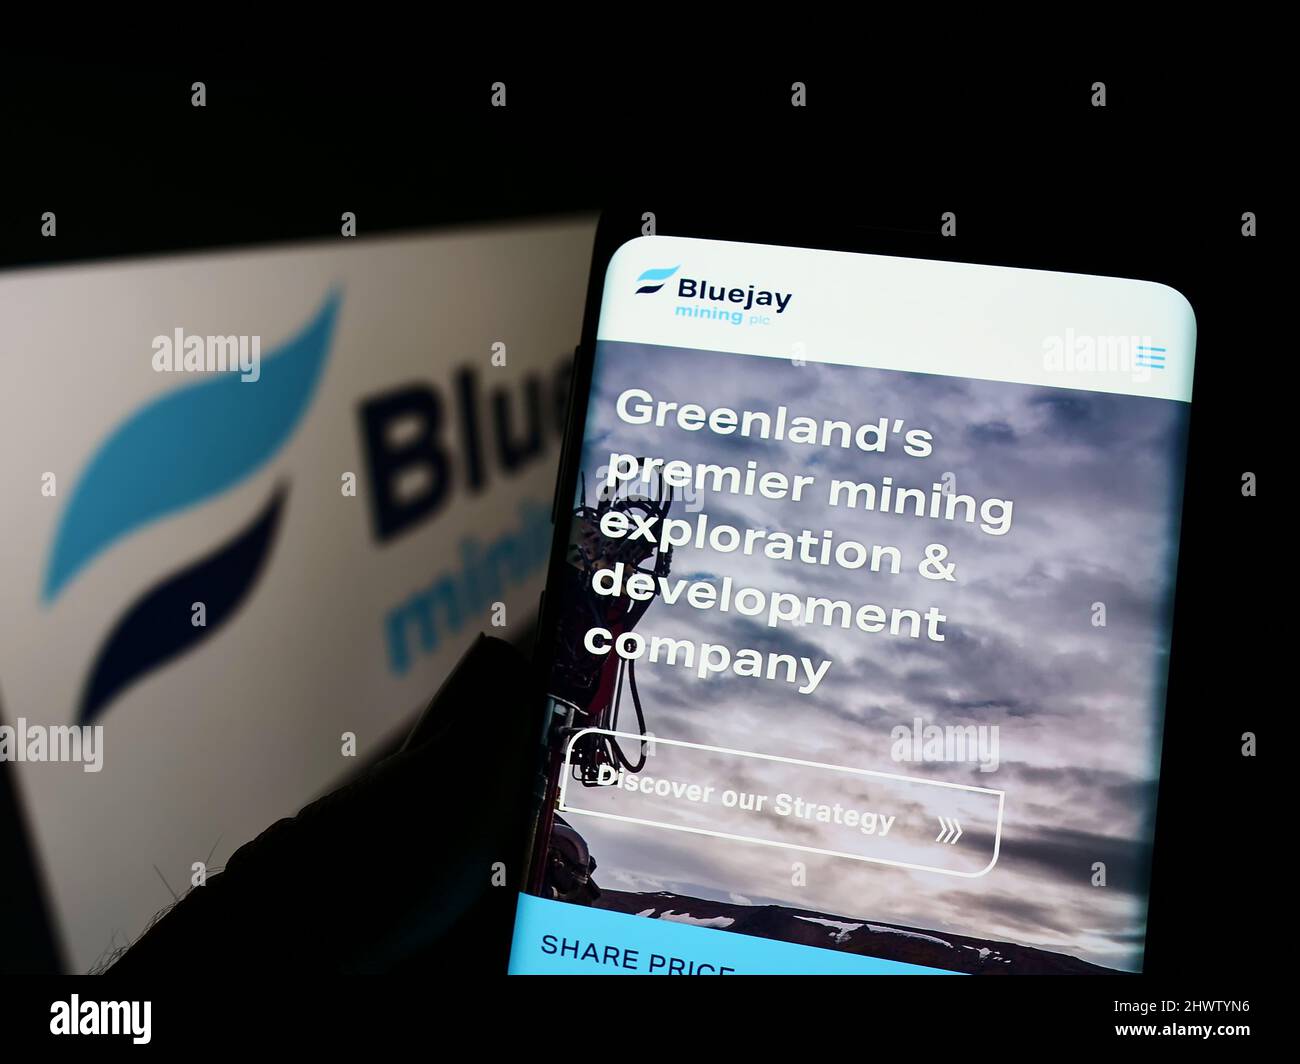 Person holding cellphone with website of British company Bluejay Mining plc on screen in front of logo. Focus on center of phone display. Stock Photo